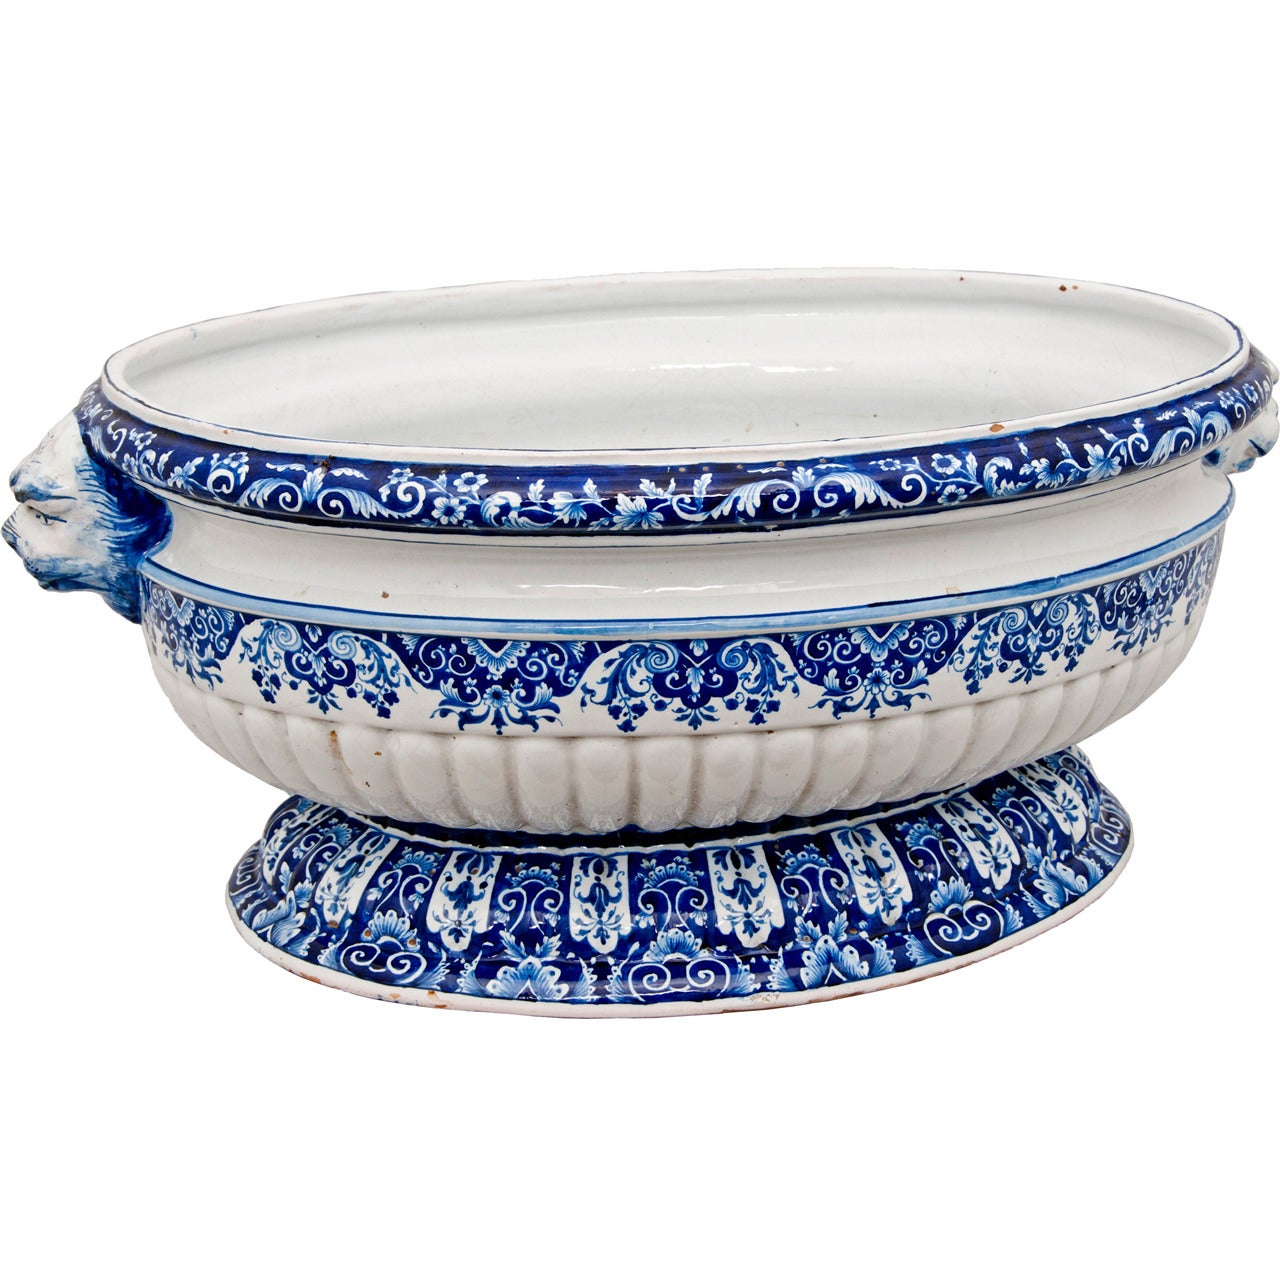 Rouen or Delft Pottery Cistern Blue and White Large Oval Basin, circa 1800